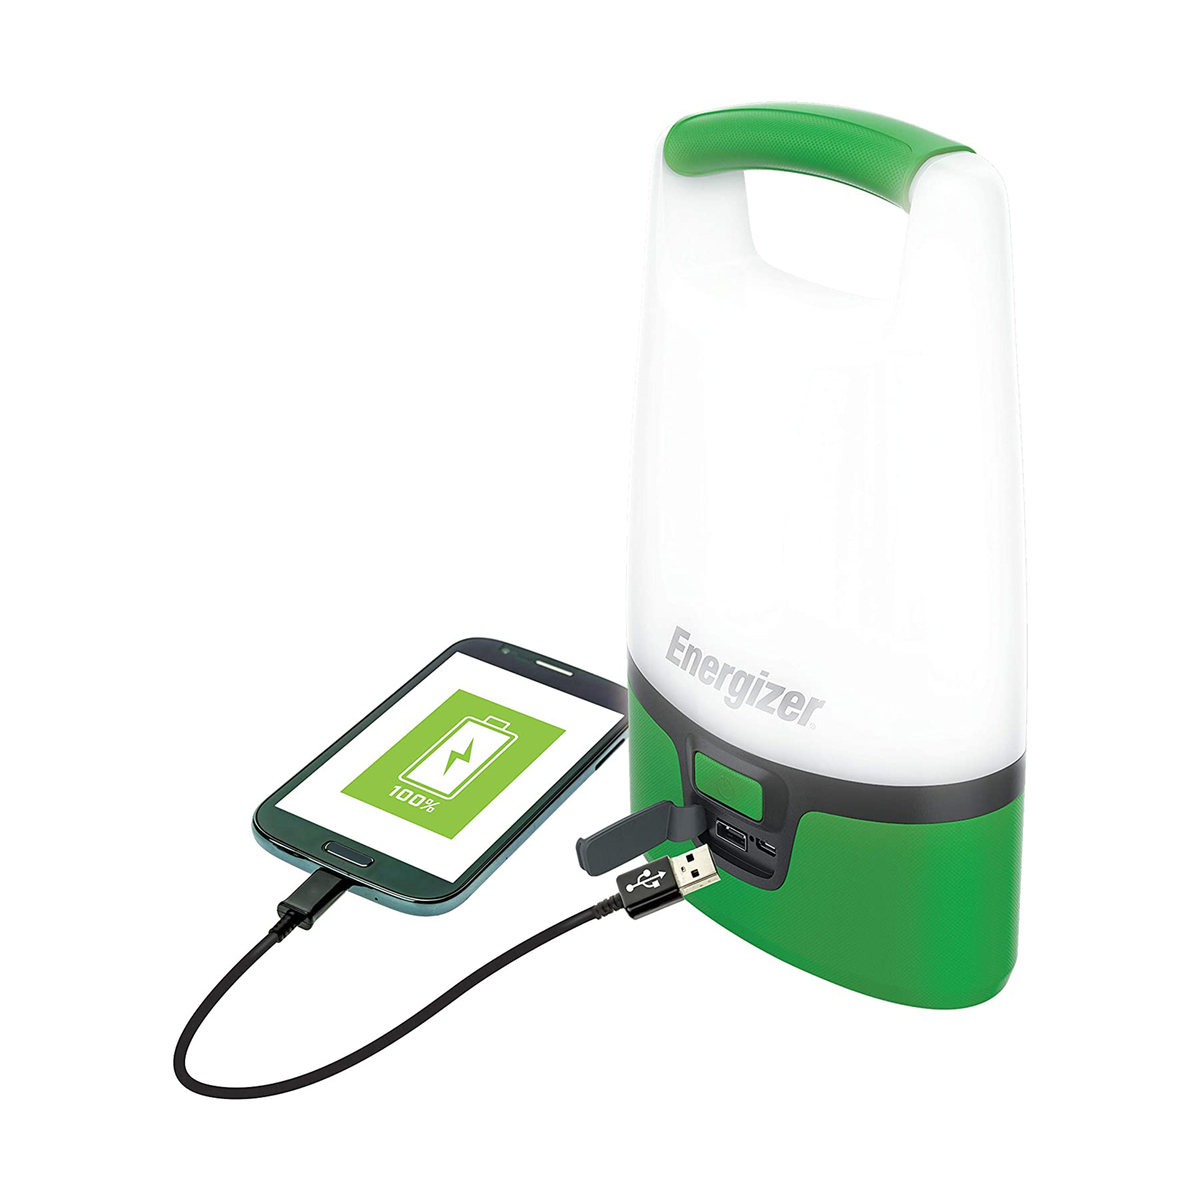 Energizer Rechargeable LED Lantern with Micro-USB Charging Cable 